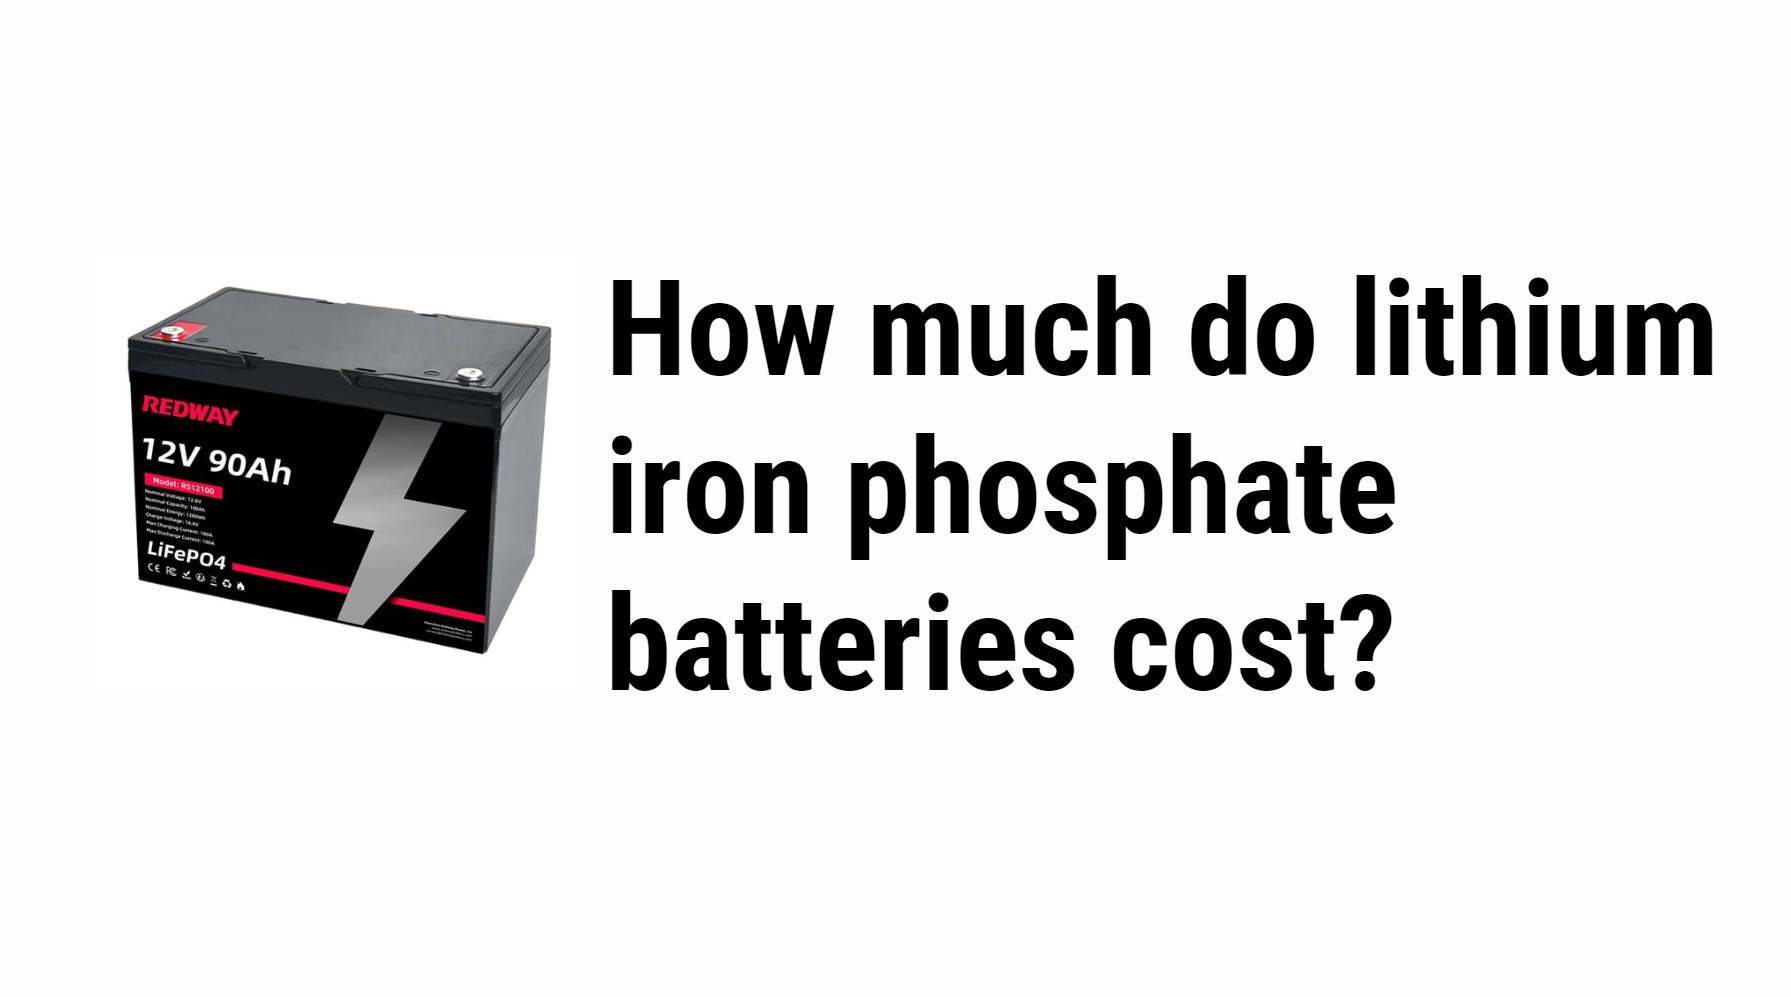 How much do lithium iron phosphate batteries cost?